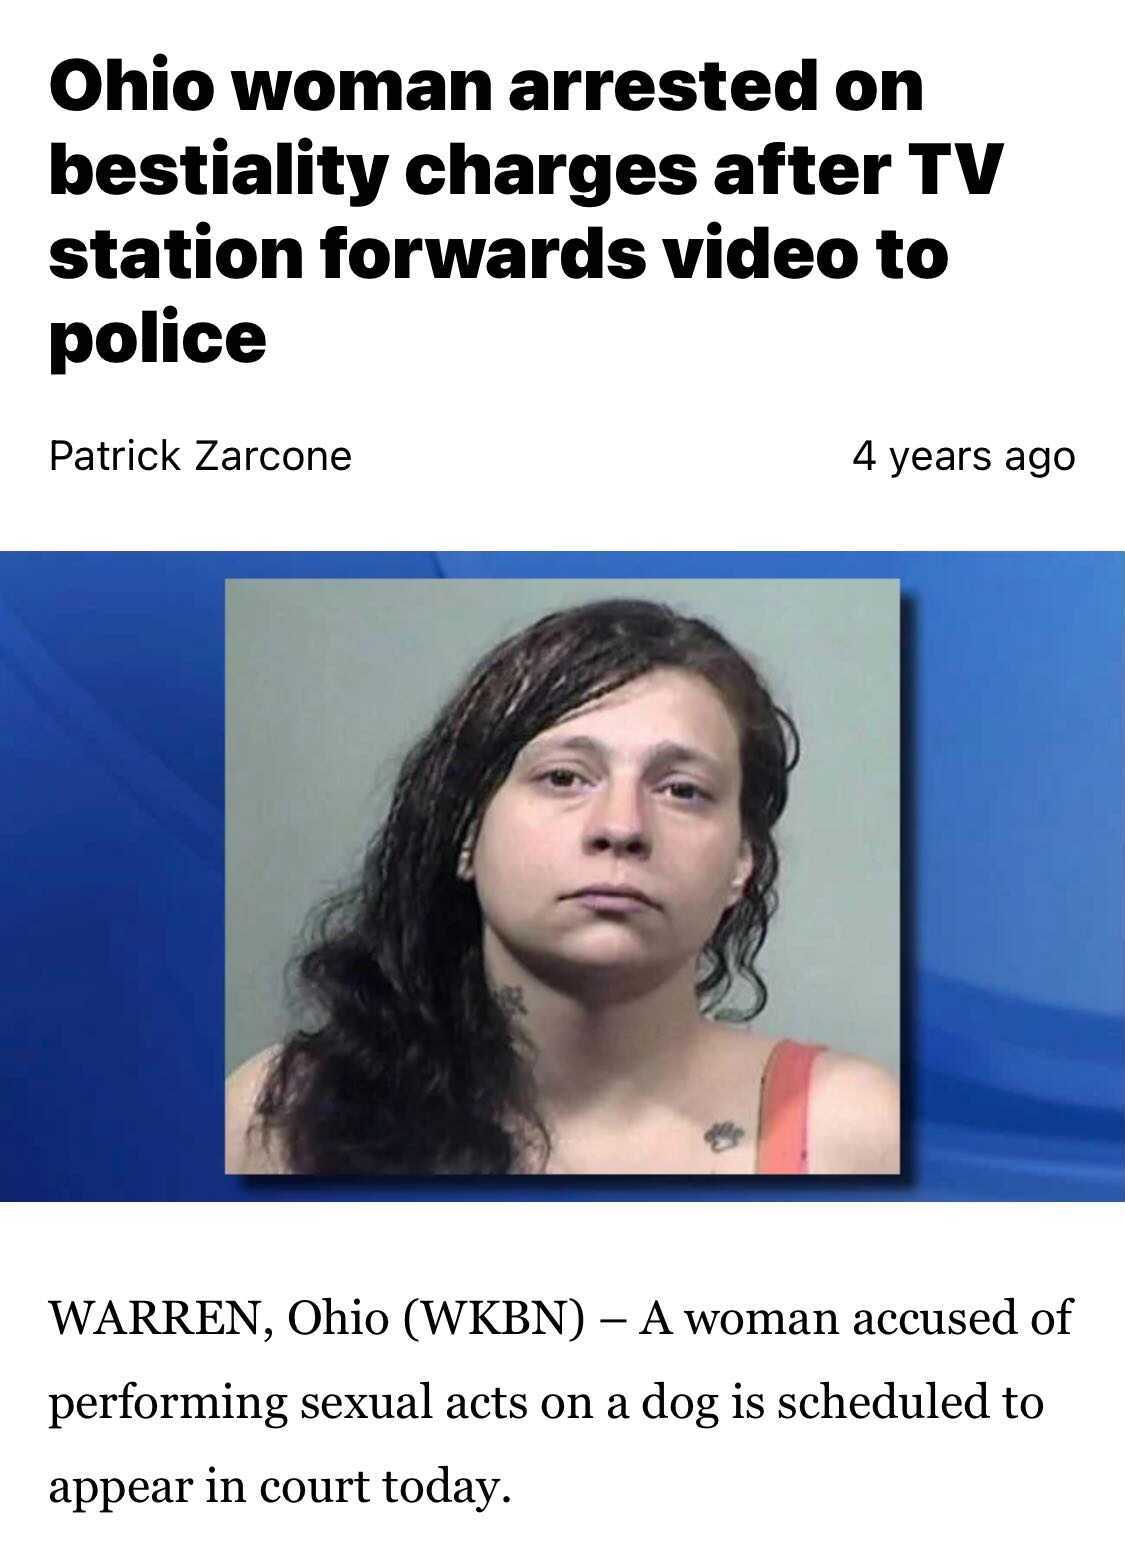 head - Ohio woman arrested on bestiality charges after Tv station forwards video to police Patrick Zarcone 4 years ago Warren, Ohio Wkbn A woman accused of performing sexual acts on a dog is scheduled to appear in court today.